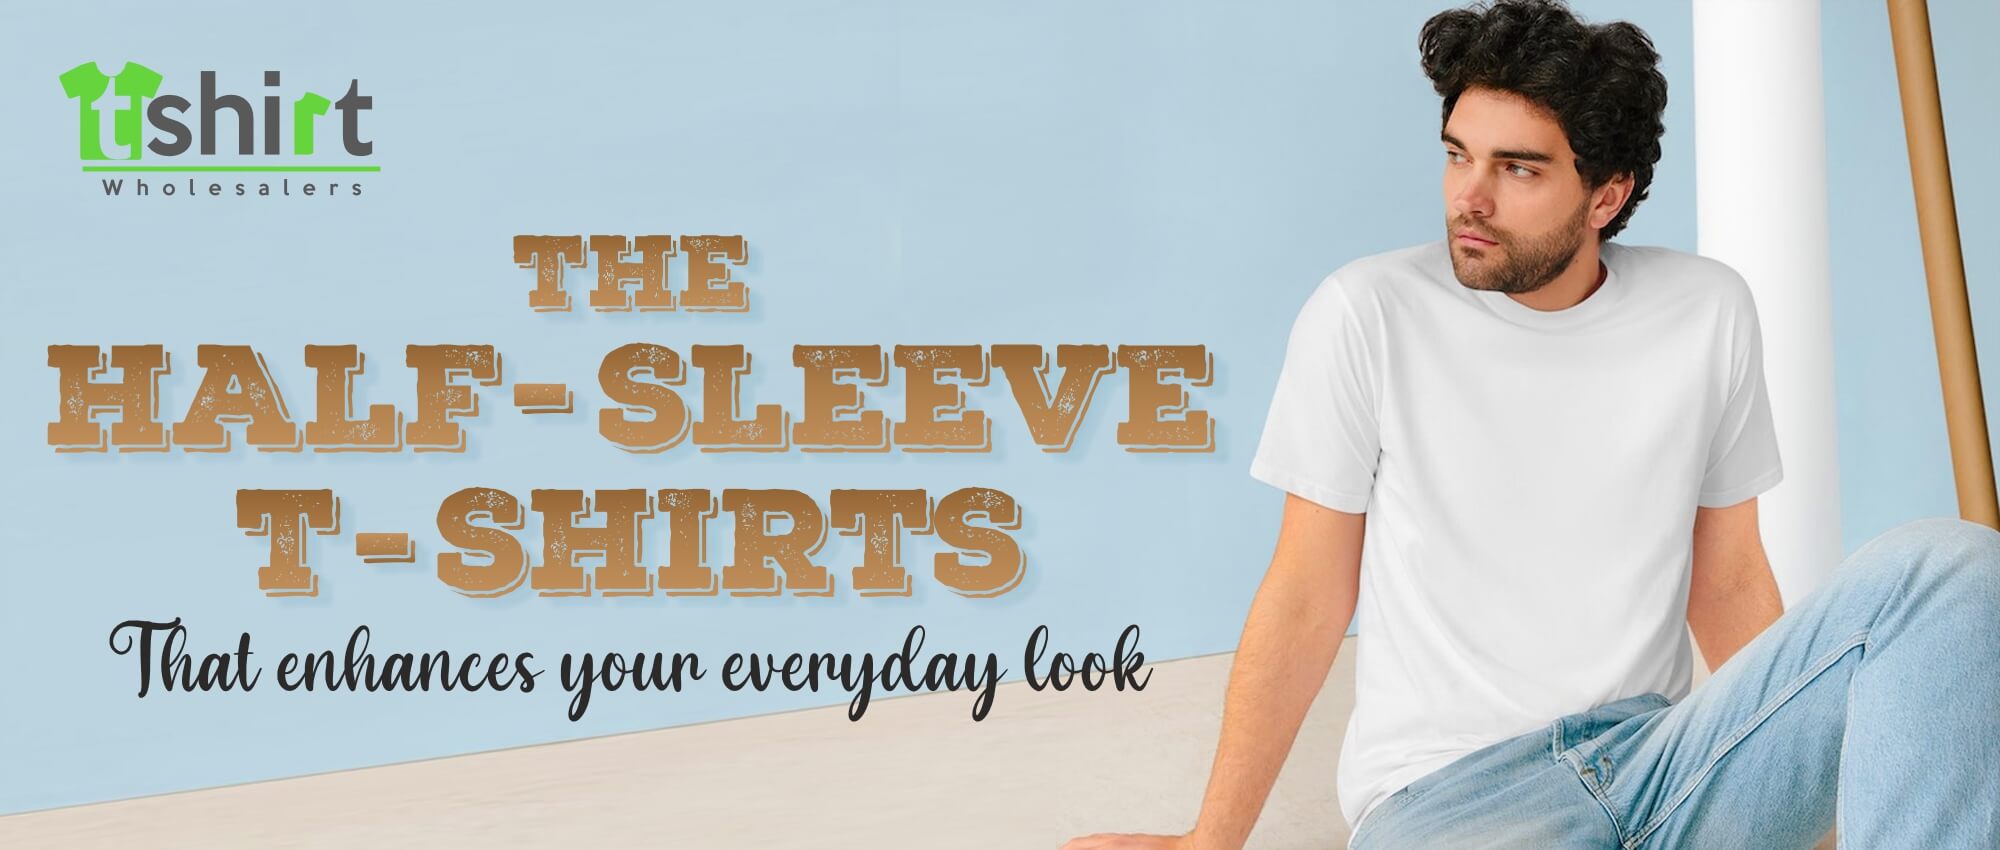 THE HALF SLEEVE T-SHIRTS THAT ENHANCES YOUR EVERYDAY LOOK